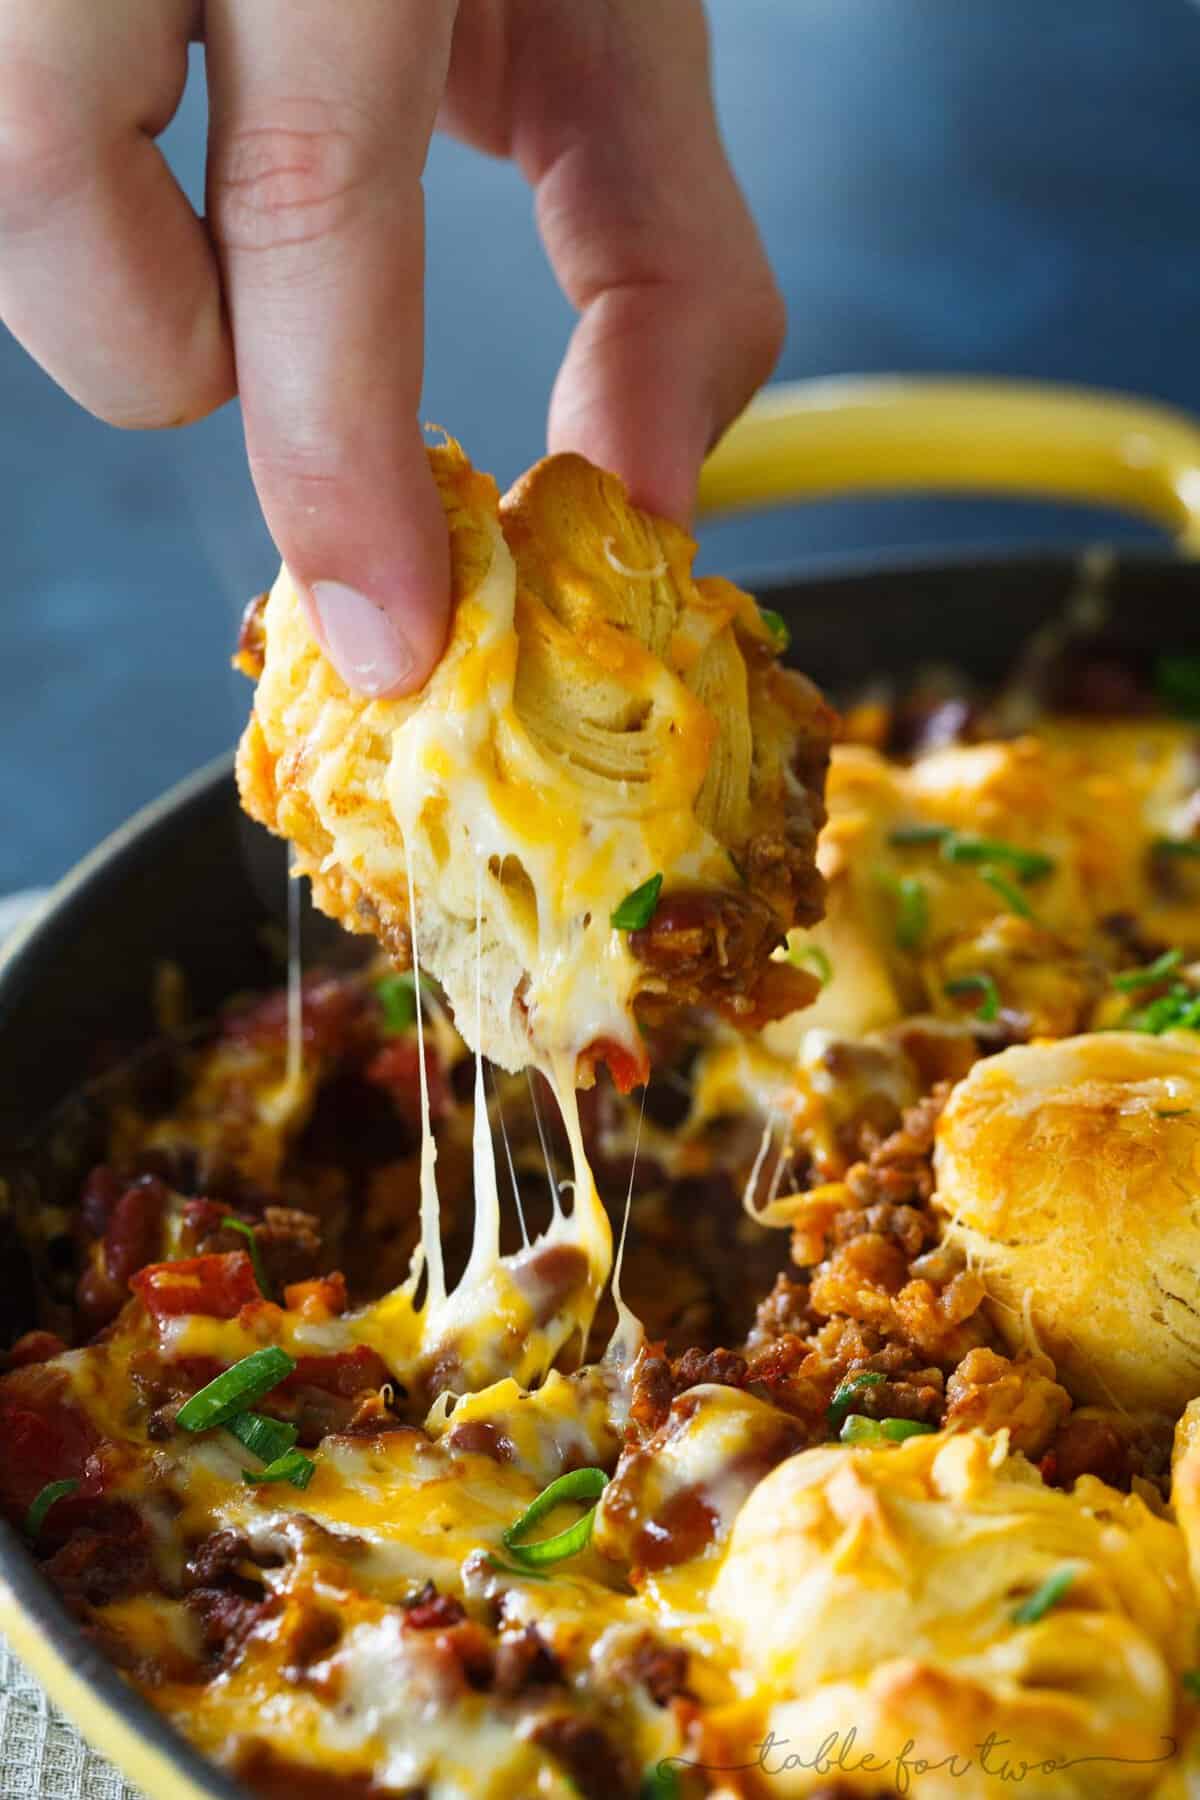 Pure comfort food is right here. Frito pie chili biscuit skillet has your name written all over it if you are looking for something that will stick to your ribs! Chili topped with fritos, cheese, and biscuits — what more could you ask for?!